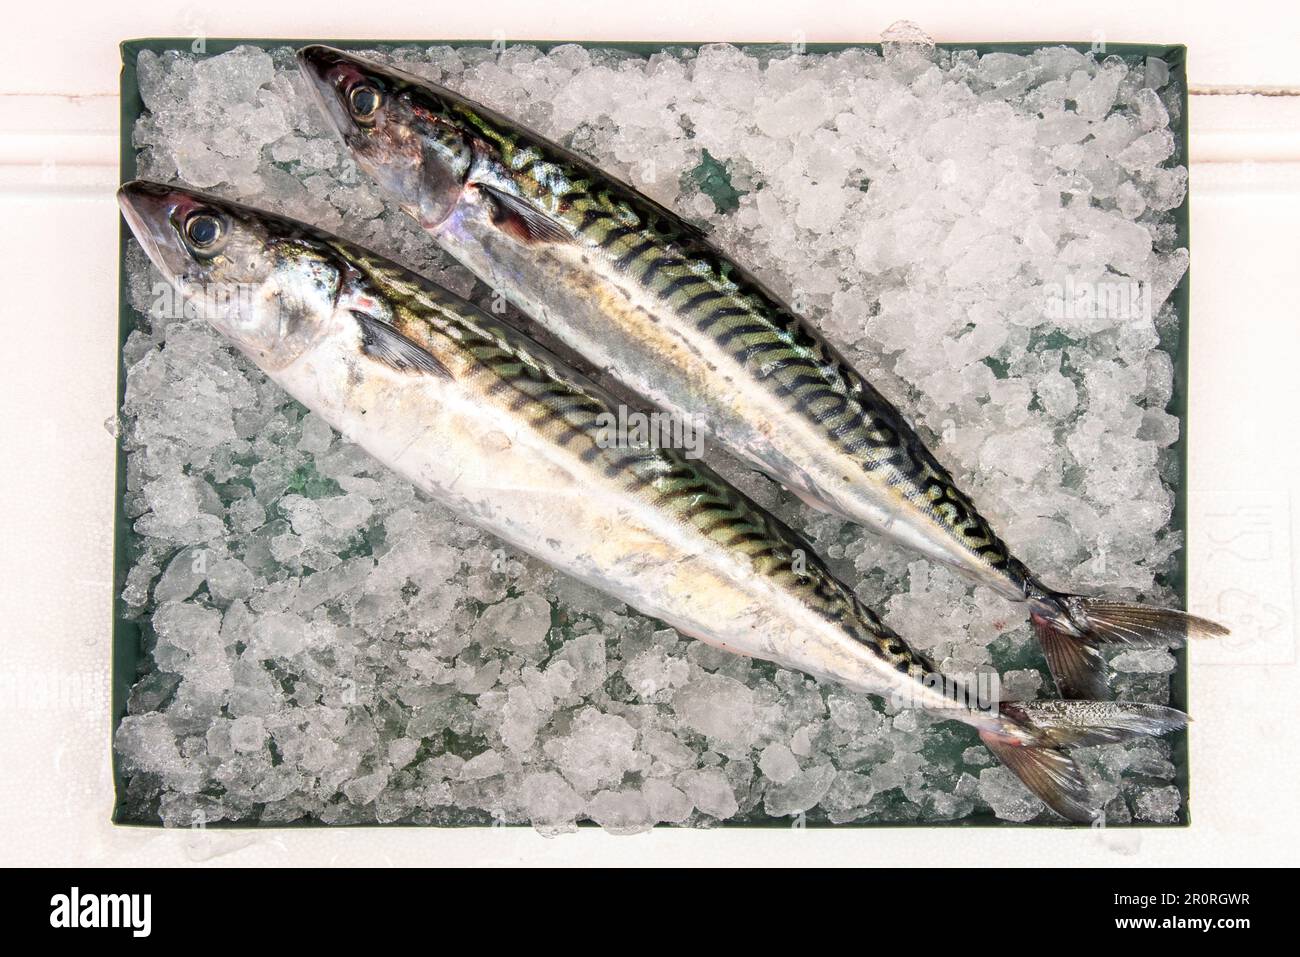 The Atlantic mackerel or mackerel, also called xarda and sarda, is a species of perciform fish in the Scombridae family. Mackerel is a teleost fish be Stock Photo